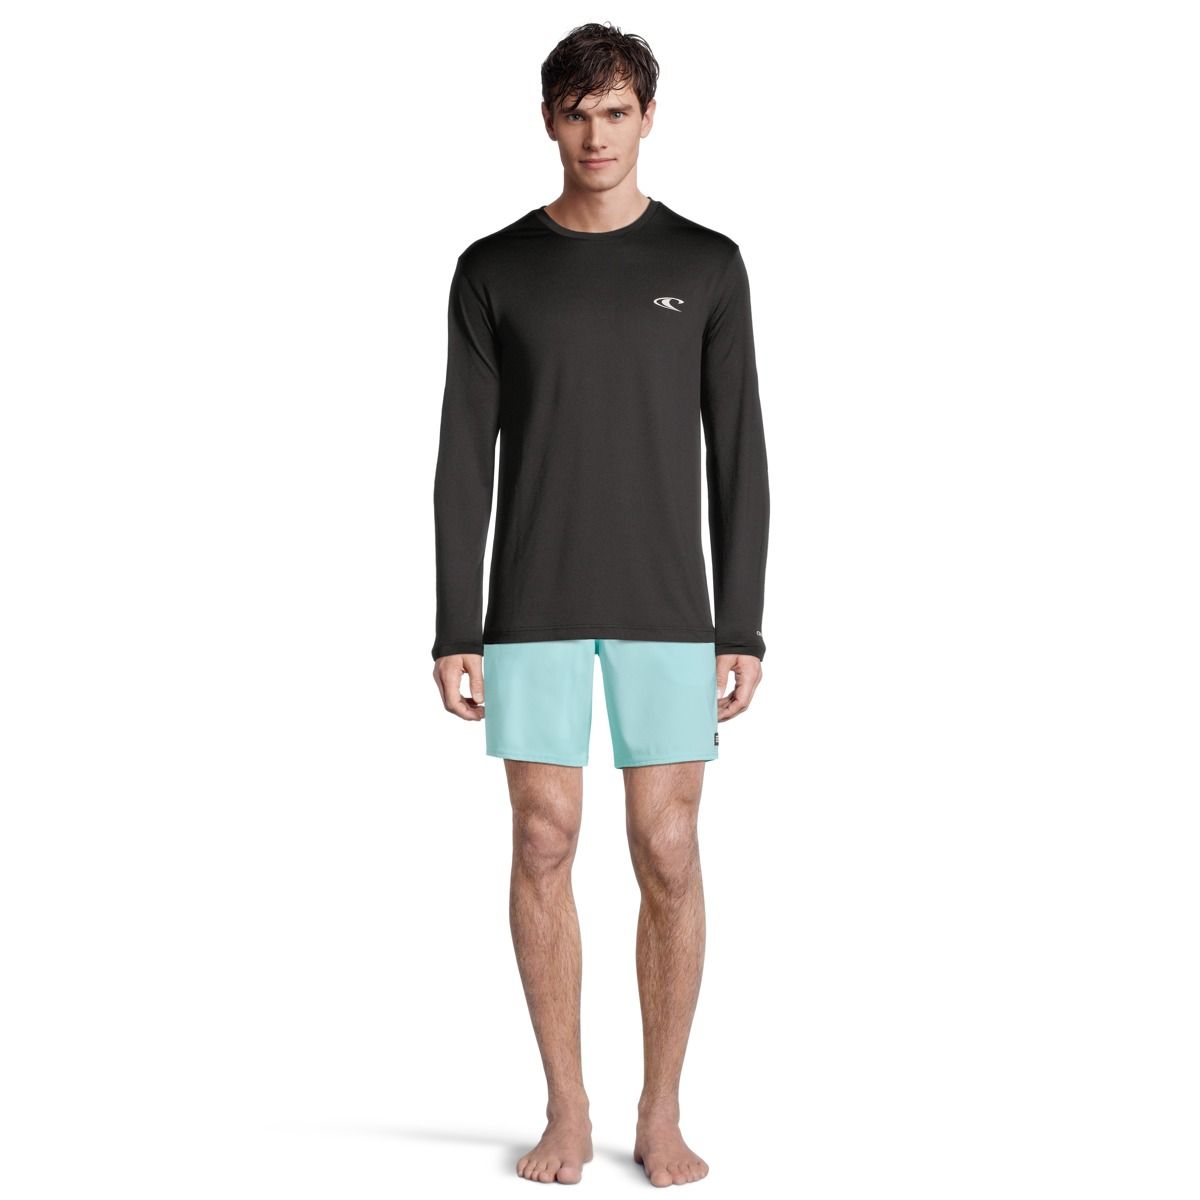 O'Neill Men's Clean And Mean Long Sleeve Swim Shirt